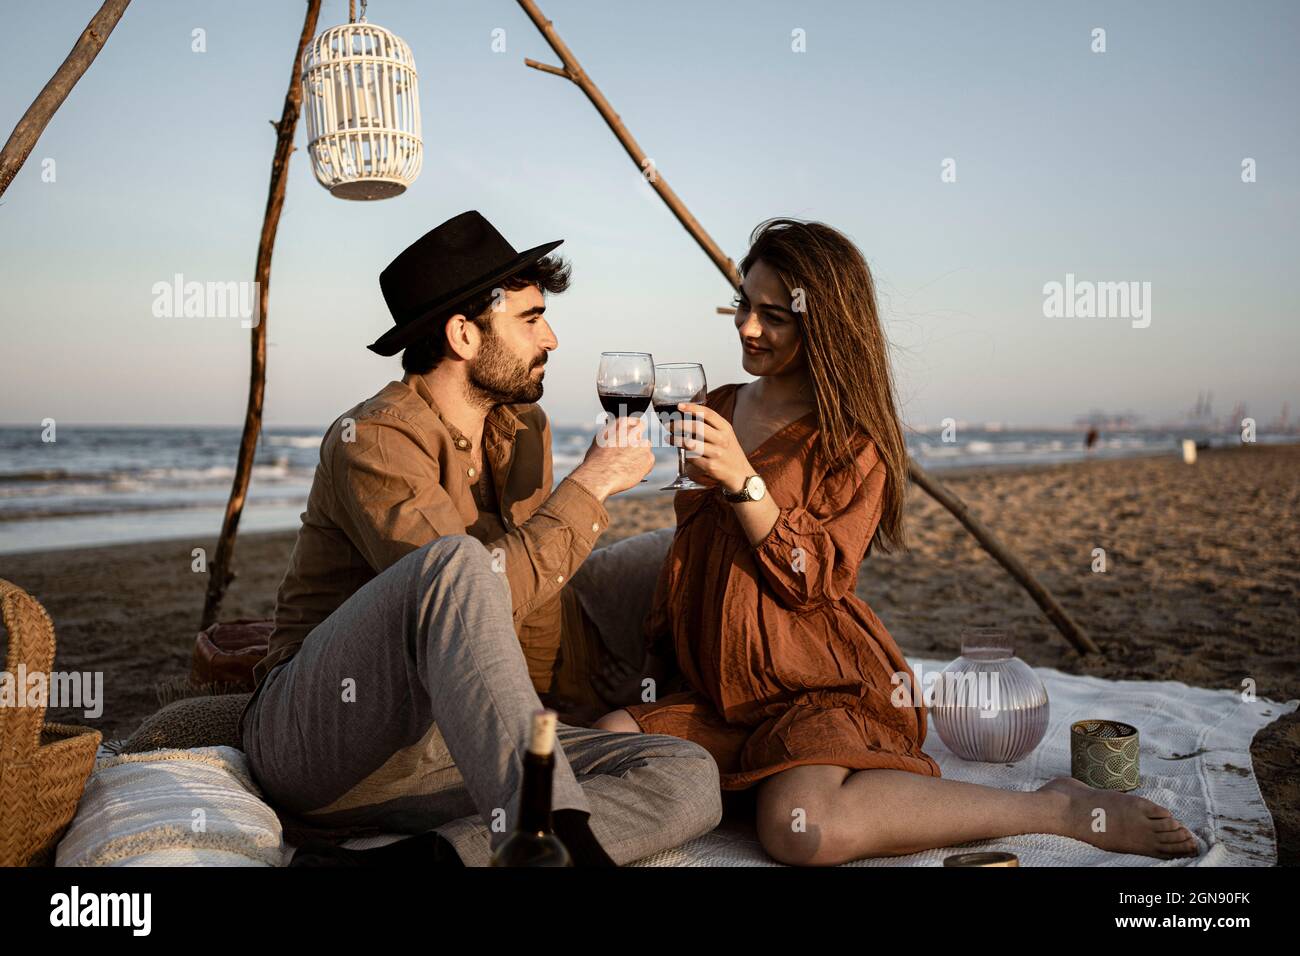 Couple toasting drink while sitting on picnic blanket Stock Photo